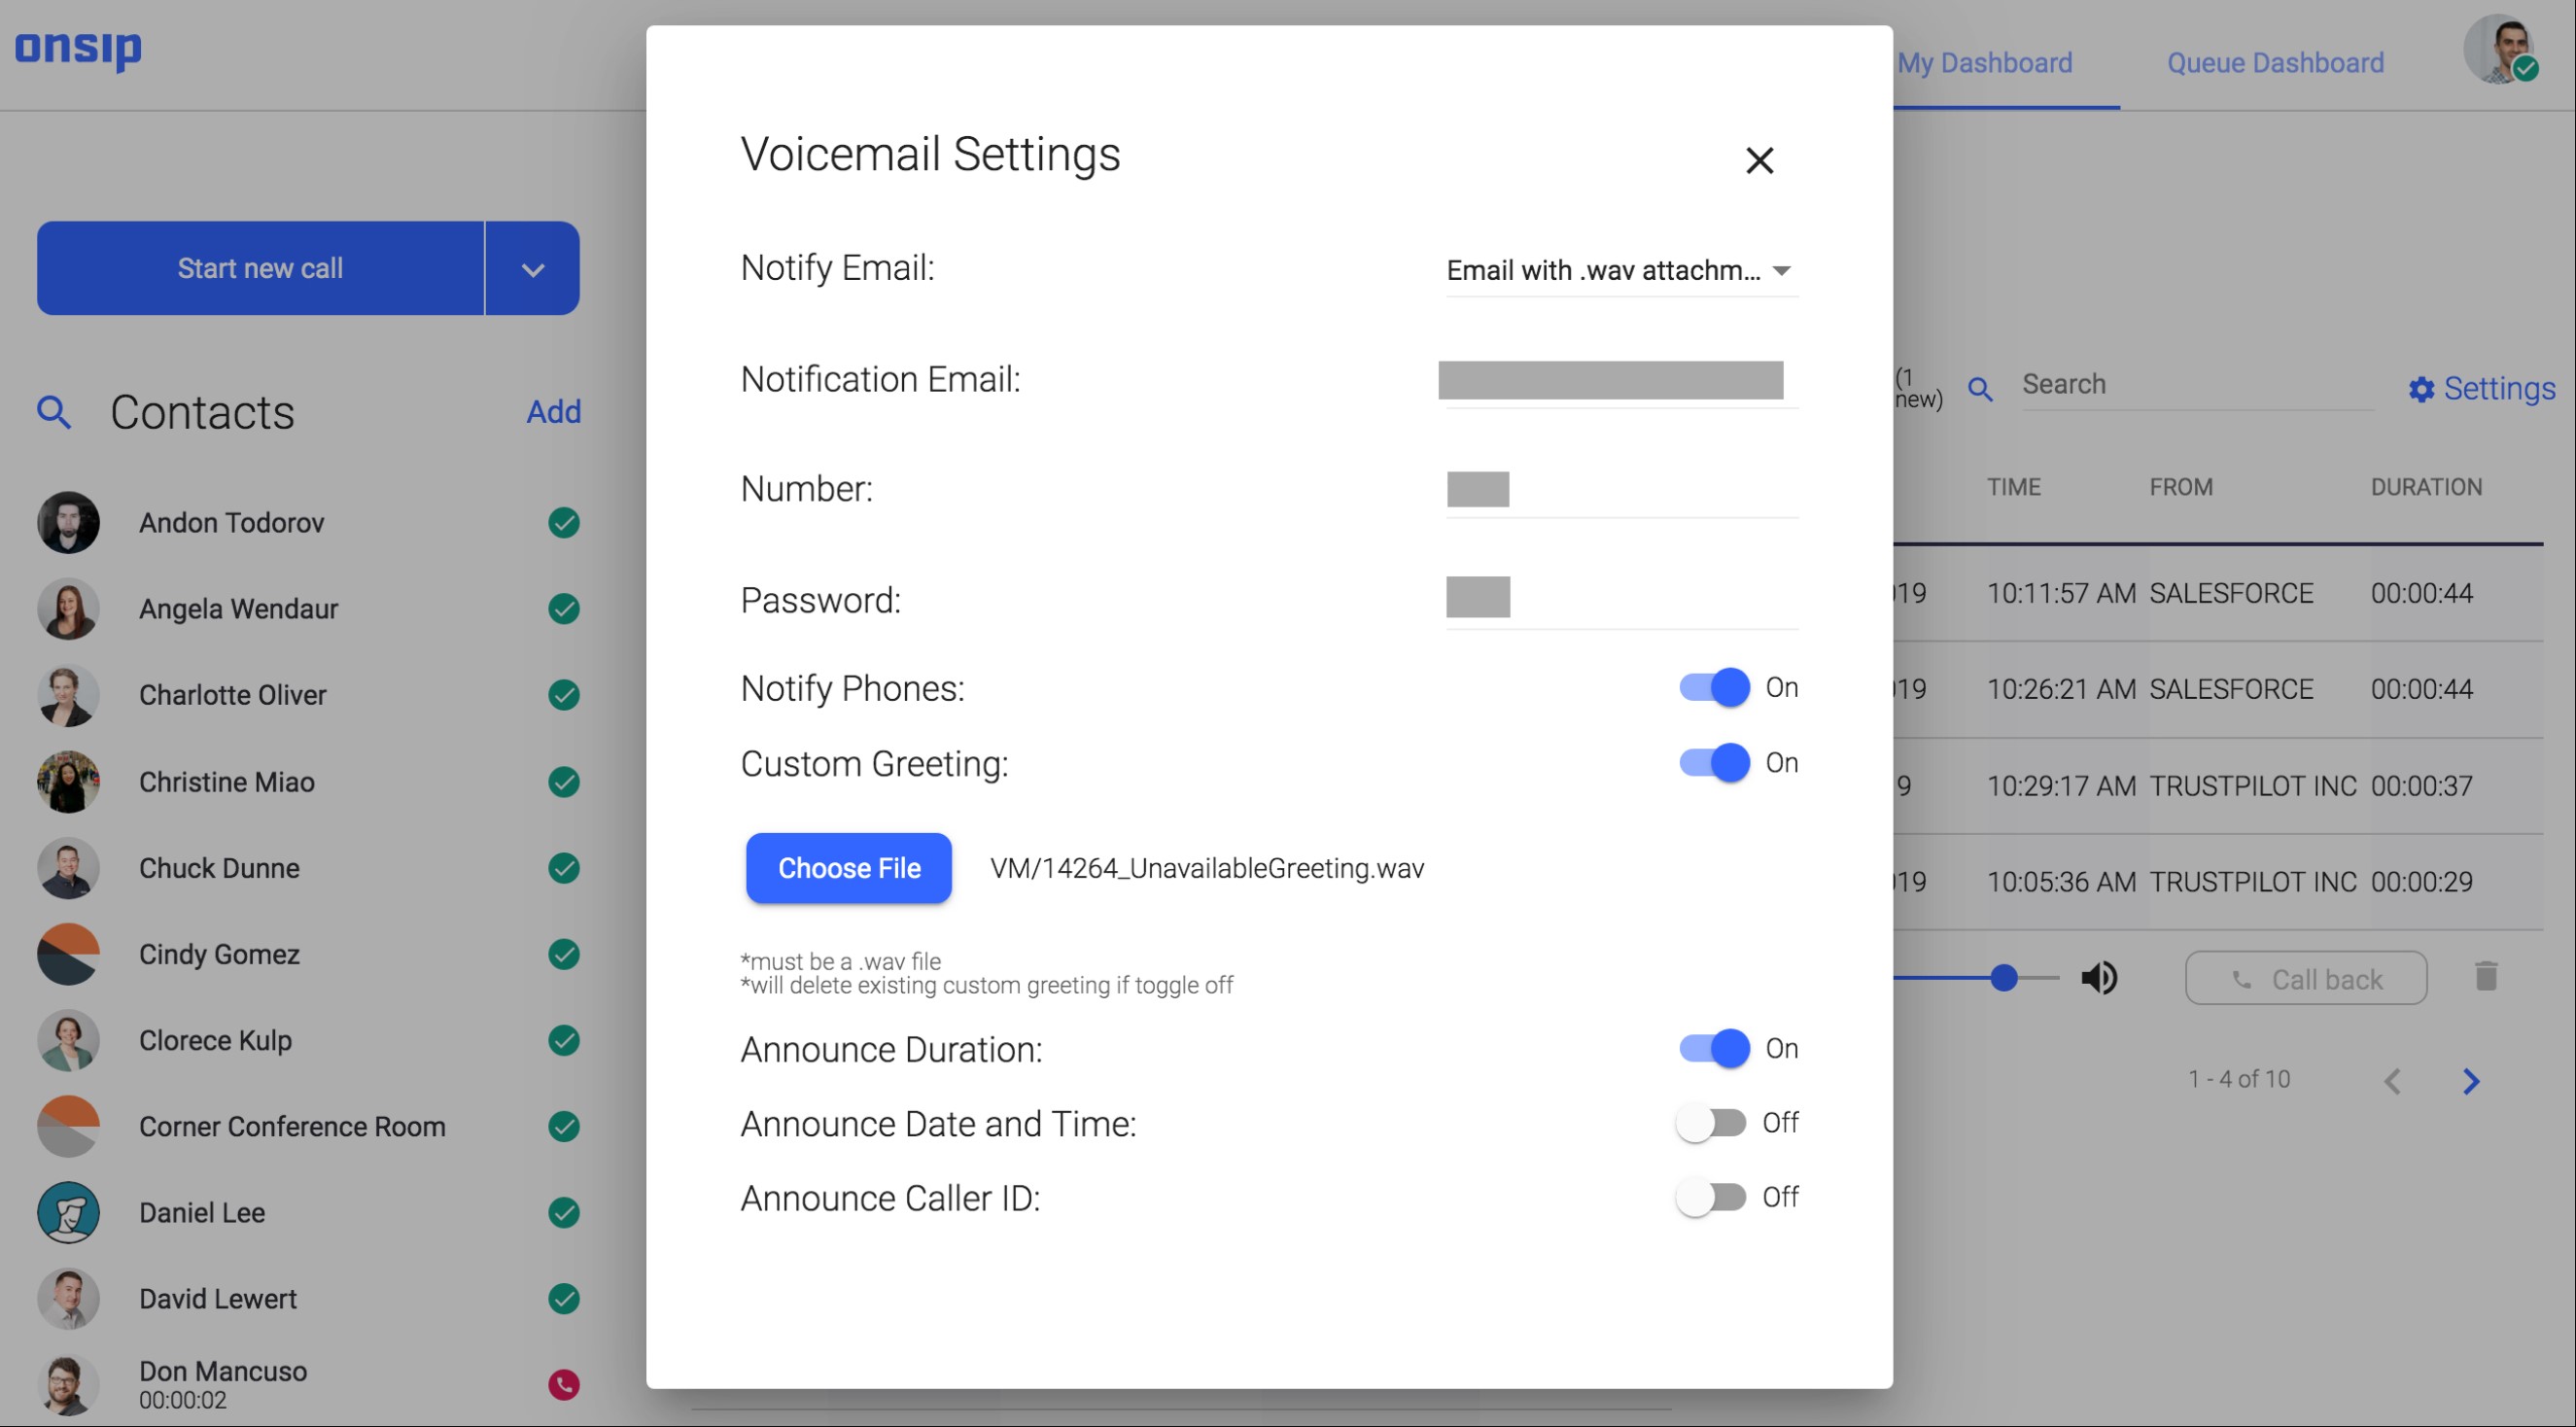 OnSIP Voicemail Settings